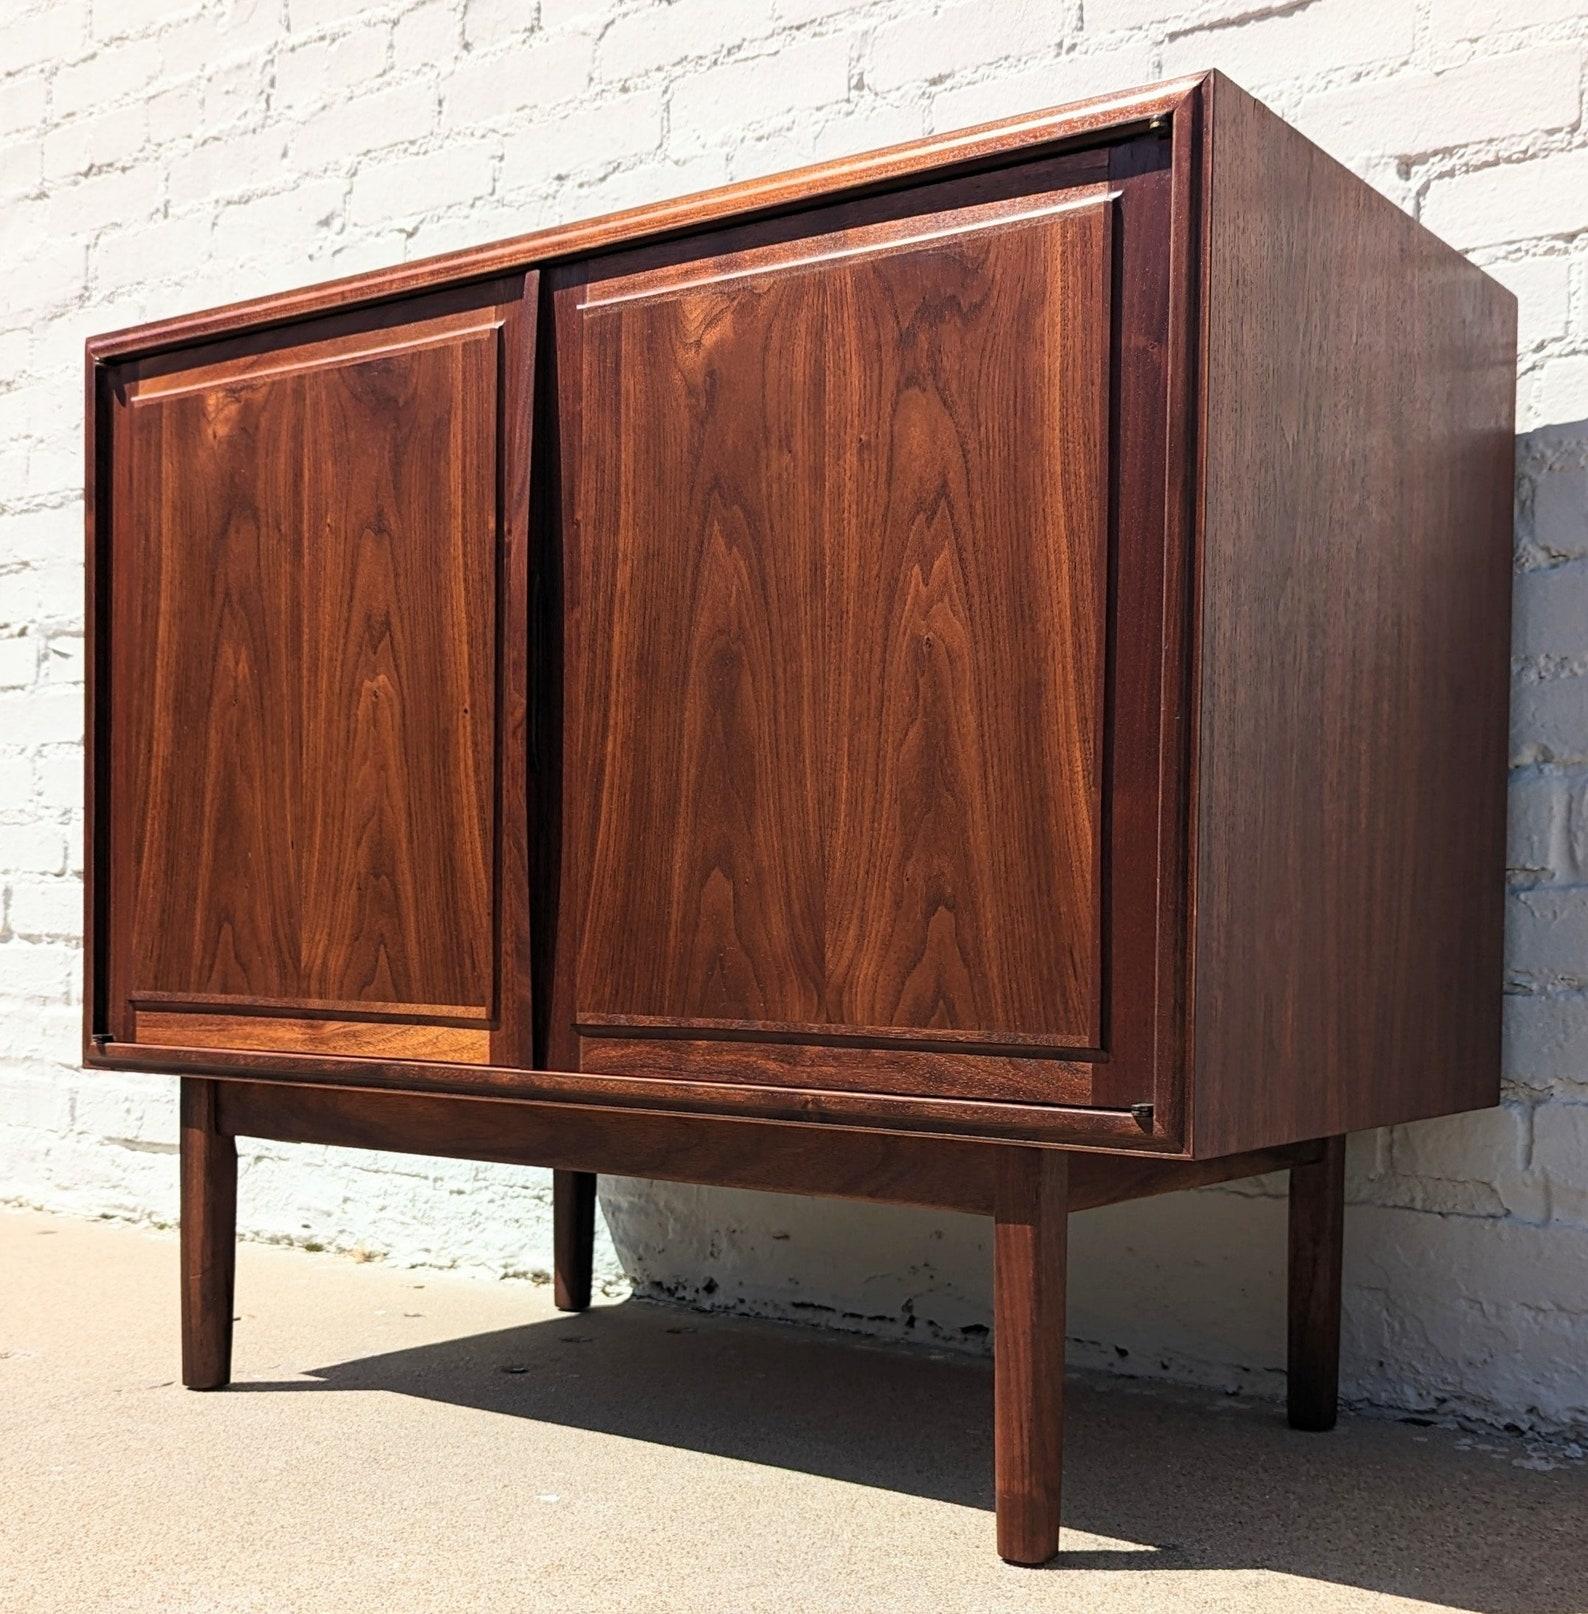 Mid Century Modern Walnut Cabinet by Founders
 
Above average vintage condition and structurally sound. Has some expected slight finish wear and scratching on top and edges. Has a couple small dings and discolorations on top. Outdoor listing